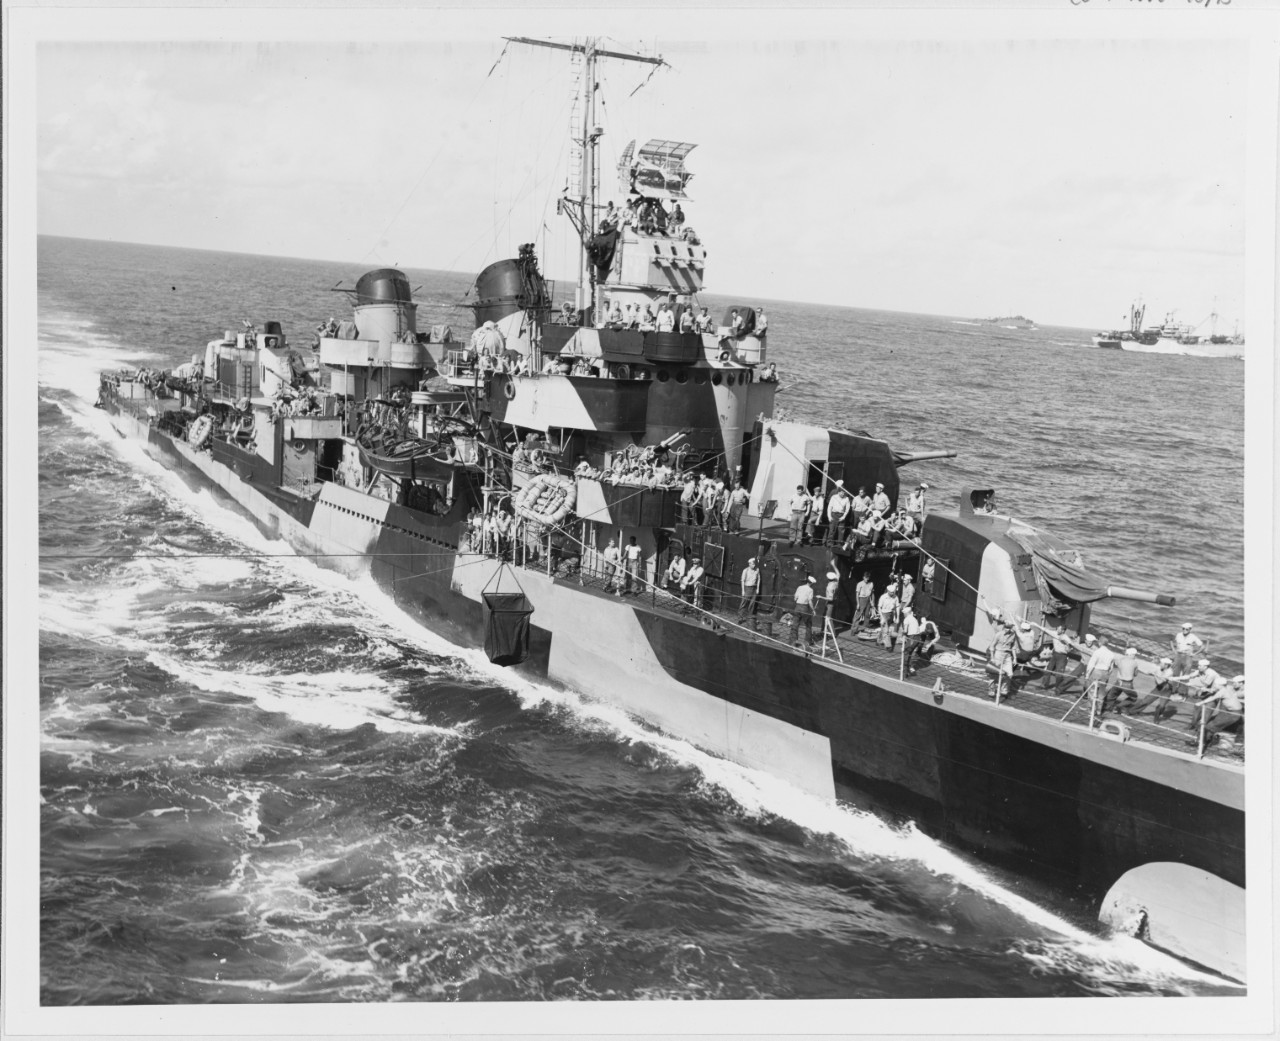 USS Stanly DD-478 Rate MM Machinist's Mate 